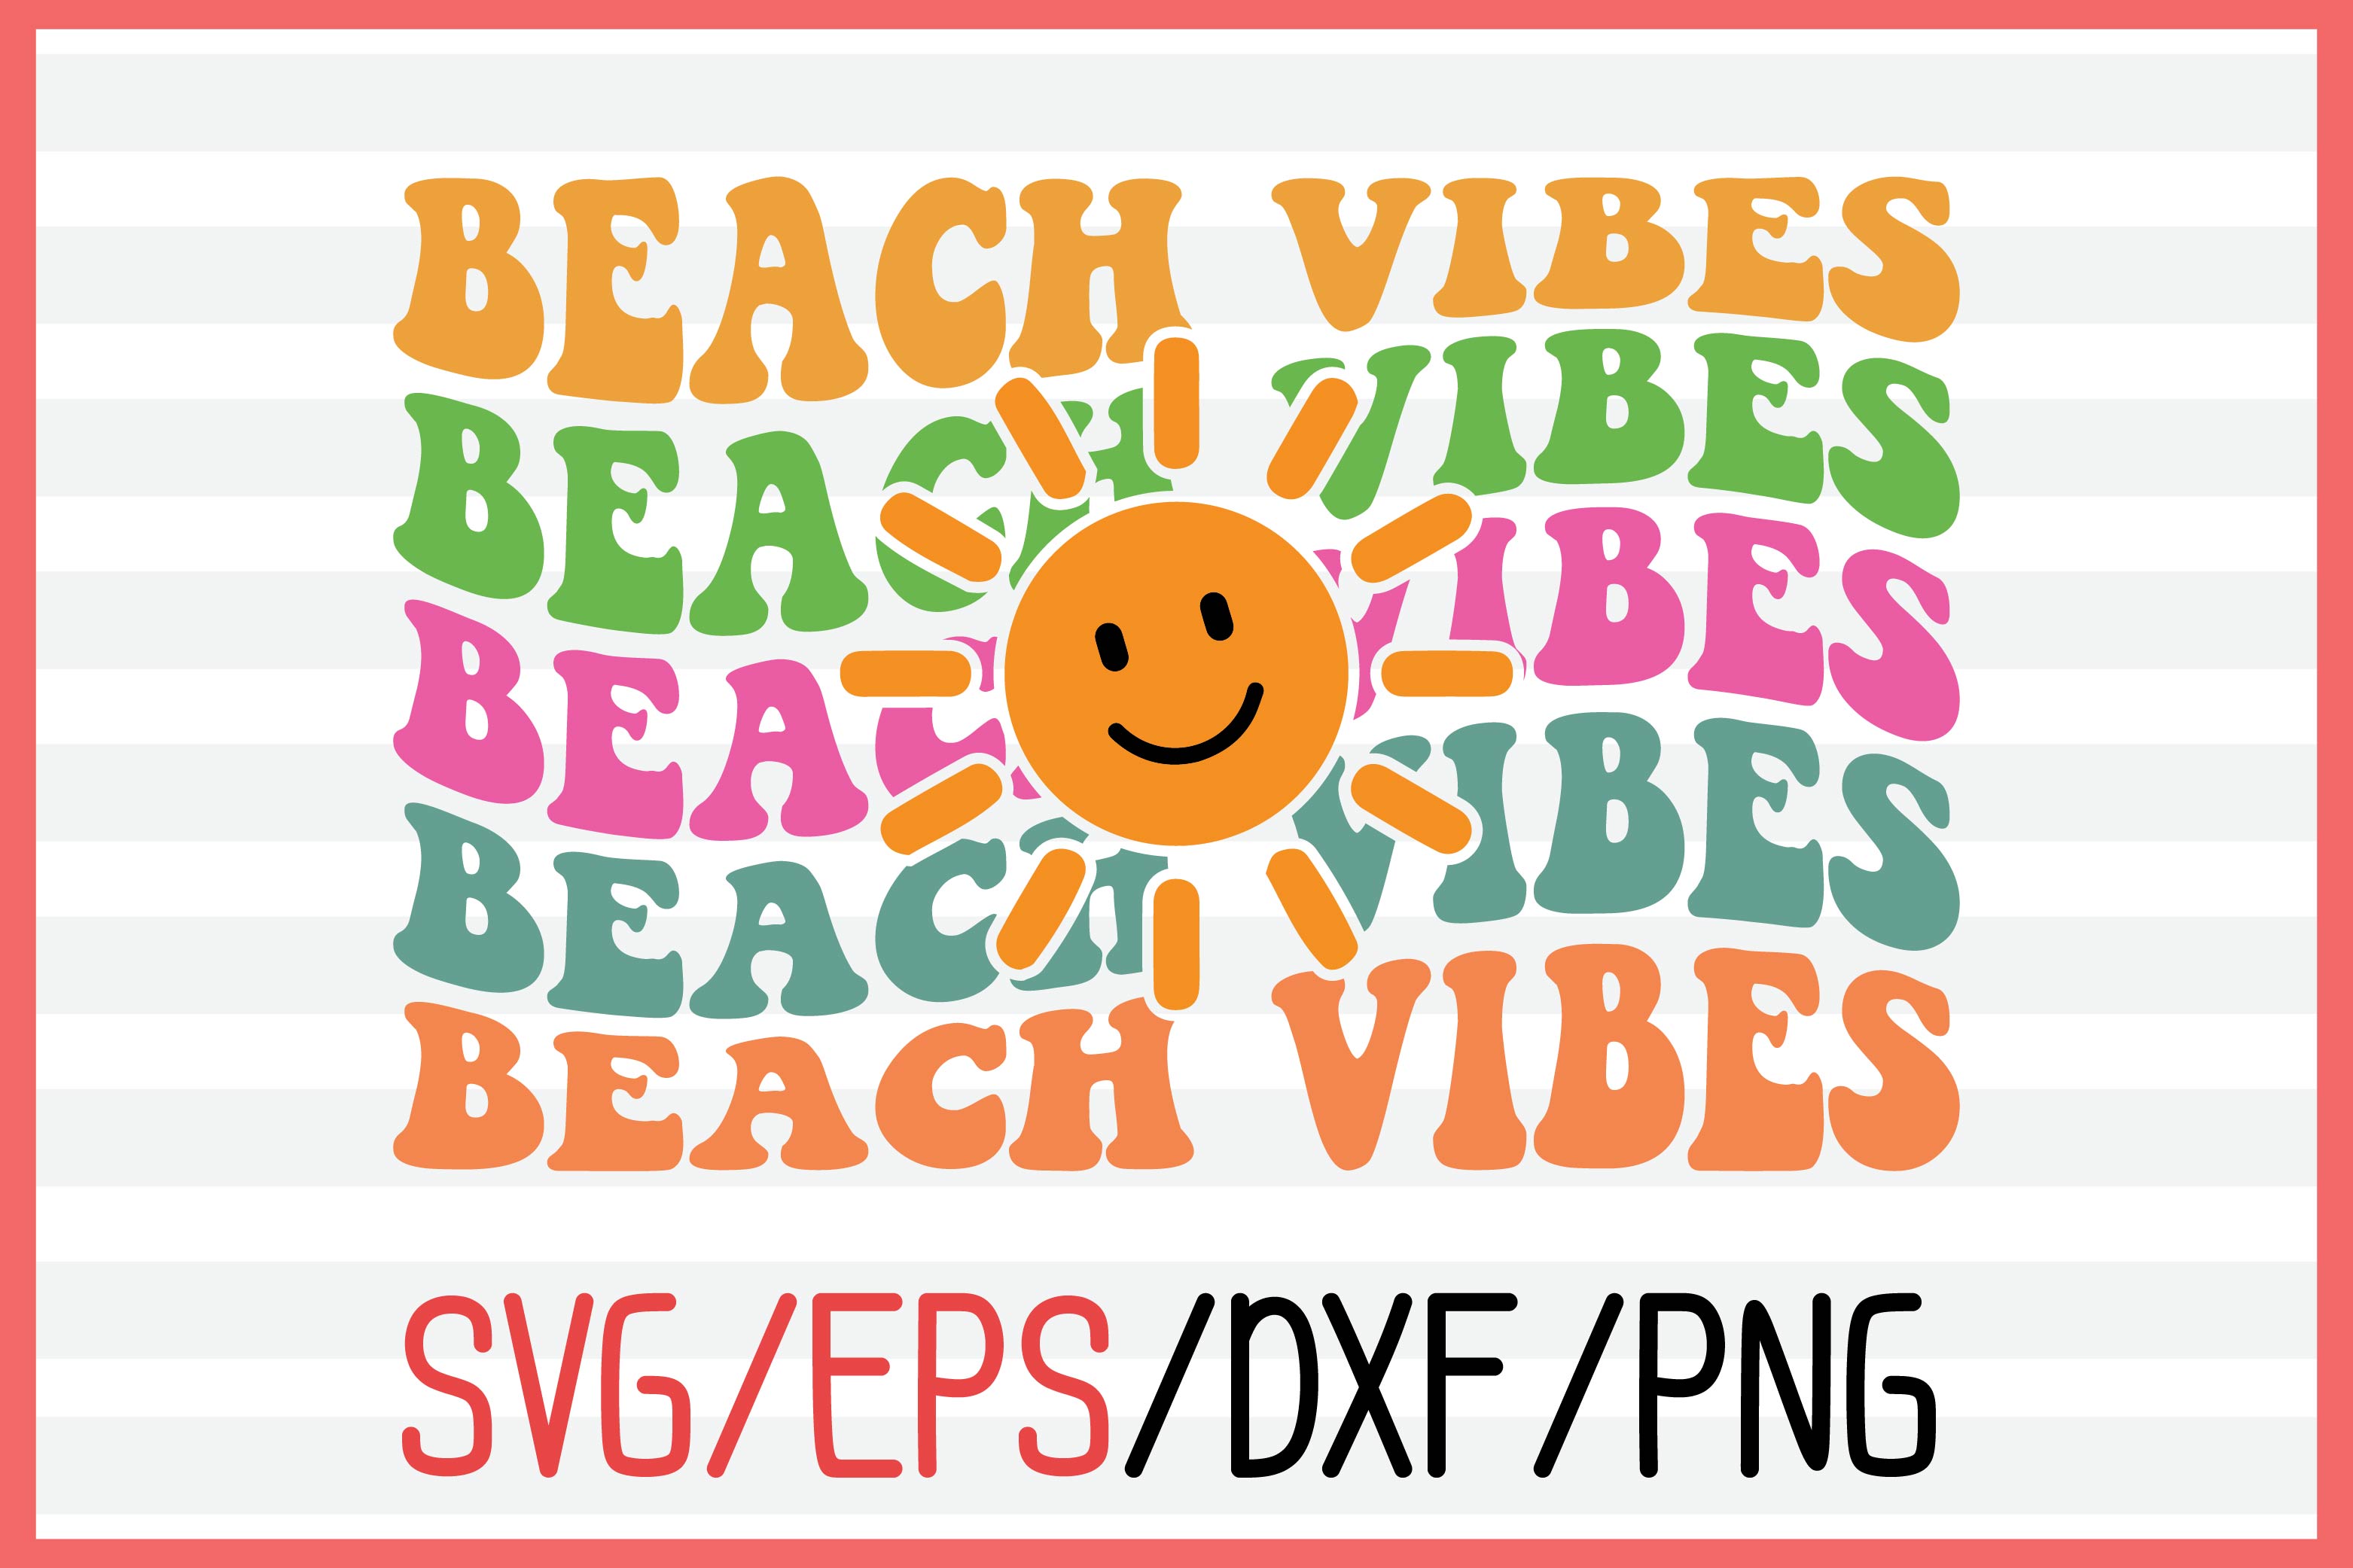 About beach vibes retro svg design pinterest preview image.